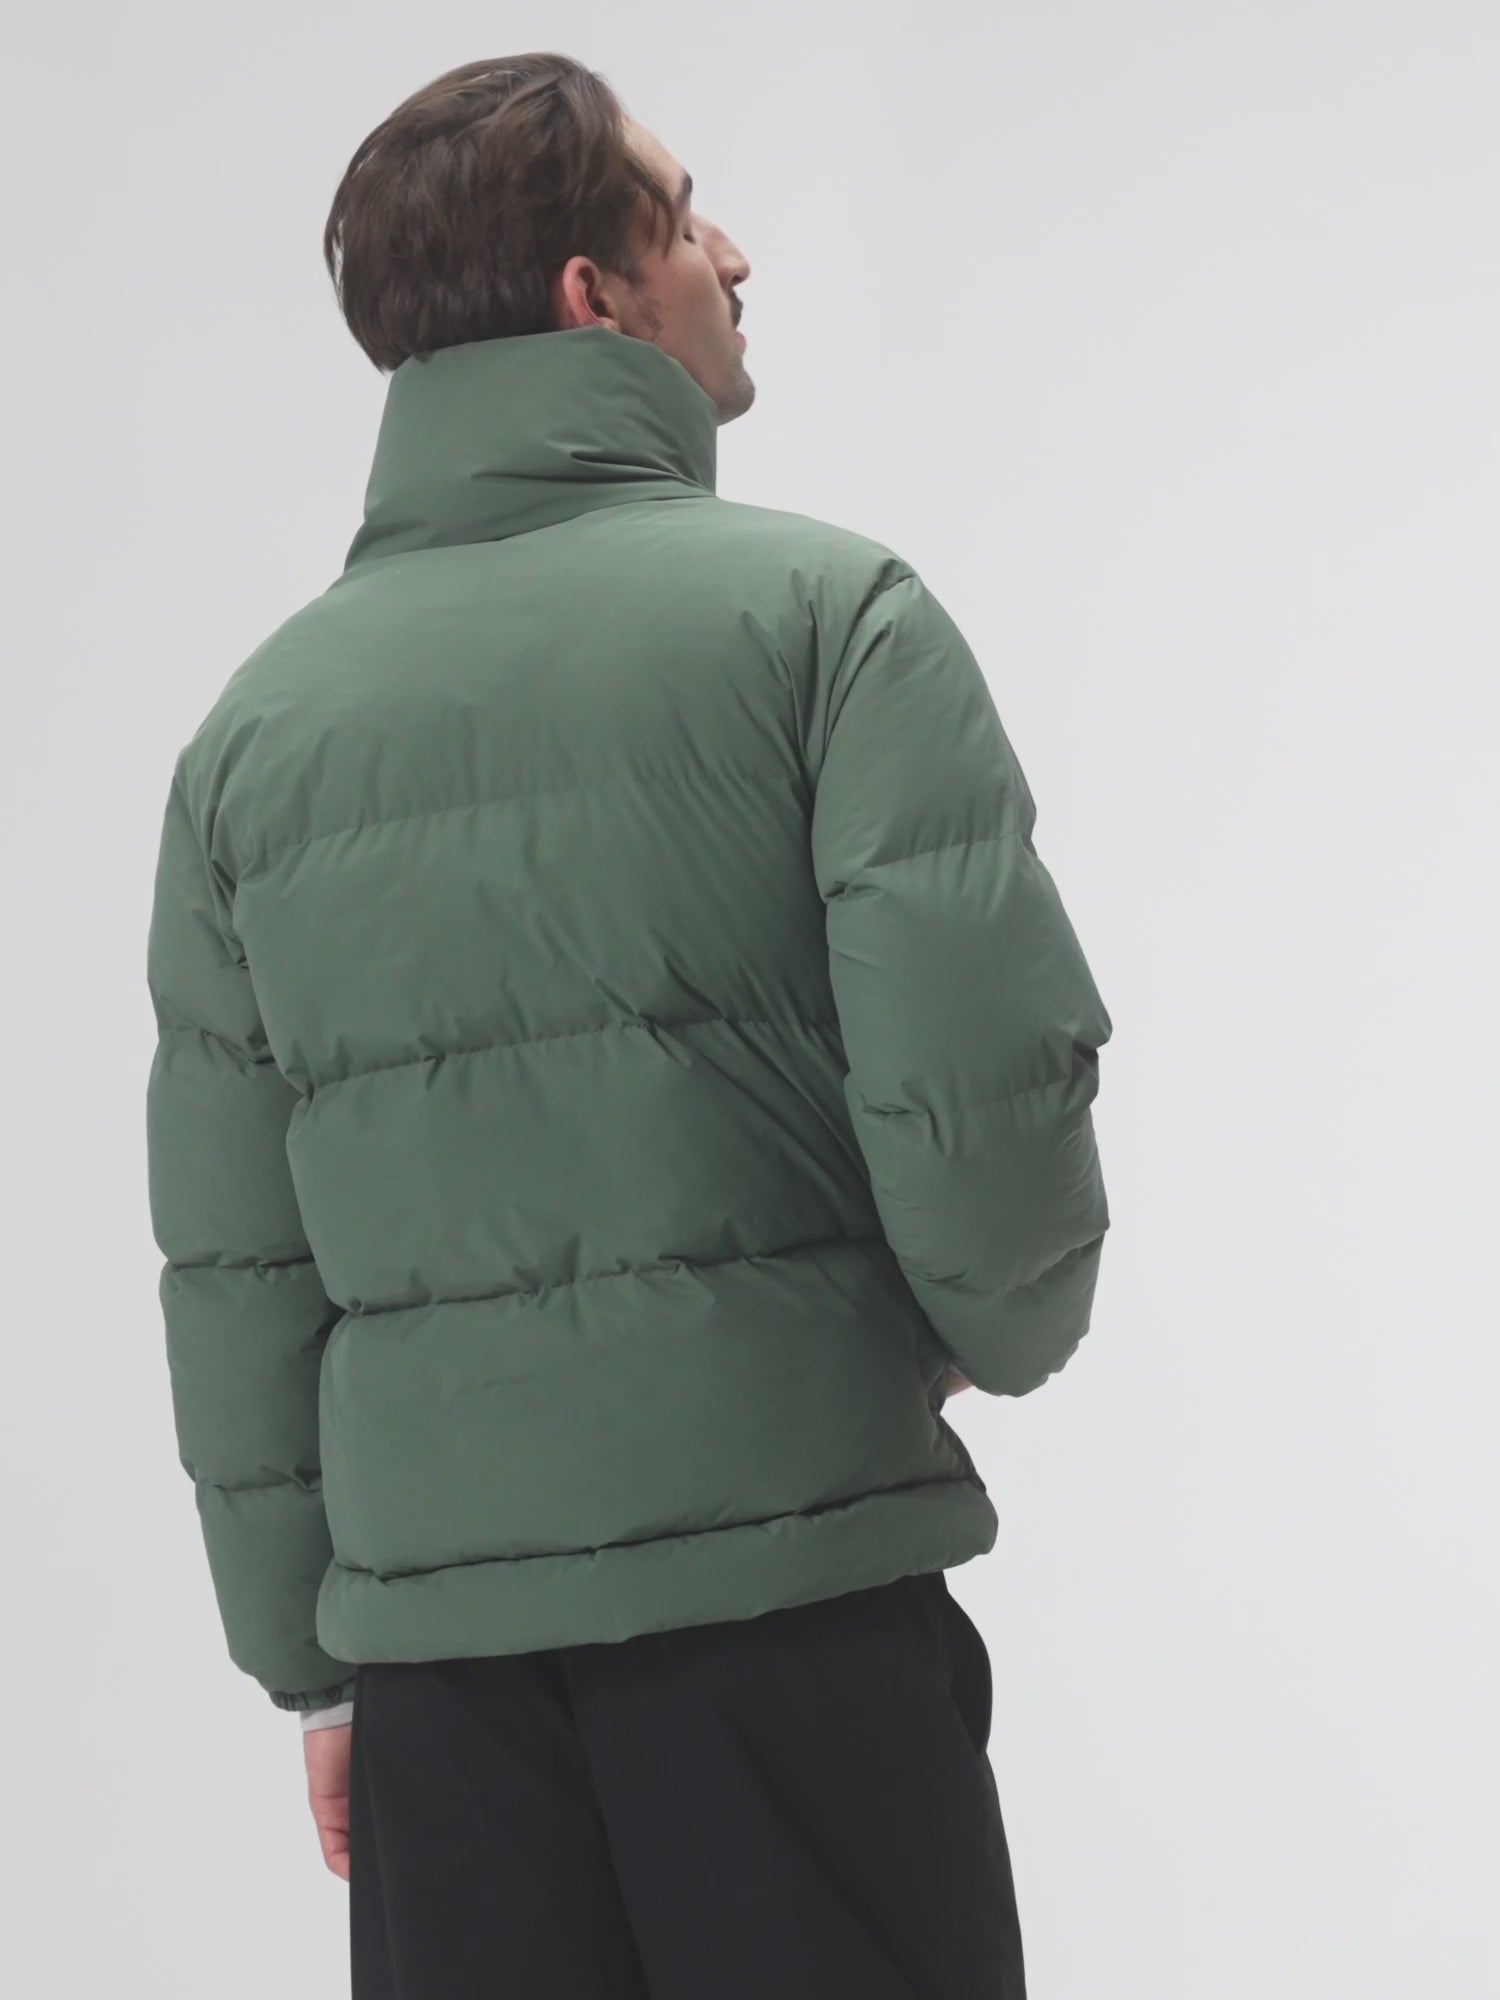 pinqponq-Puffer-Jacket-Unisex-Forester-Olive-model-video